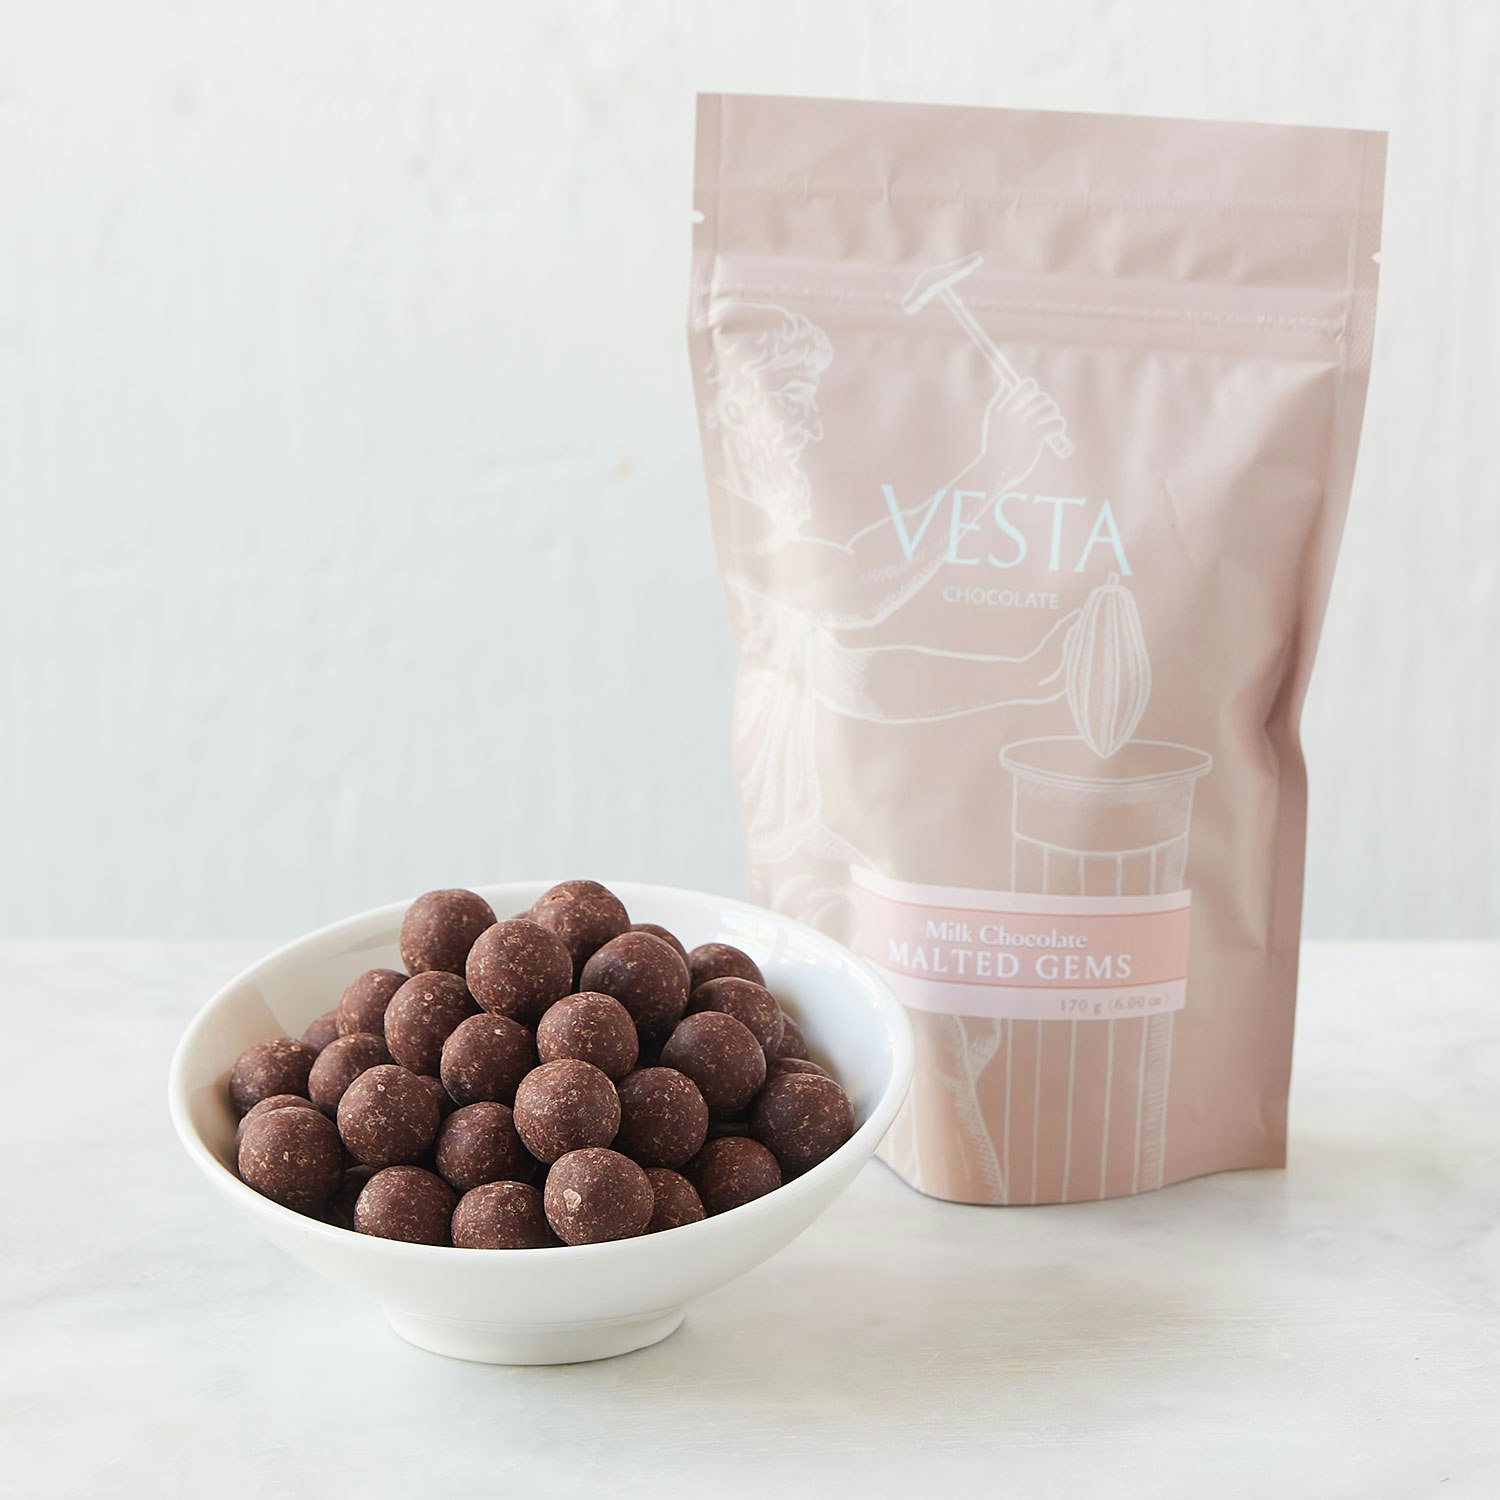 Vesta Chocolate Milk Chocolate Covered Malted Gems specialty foods